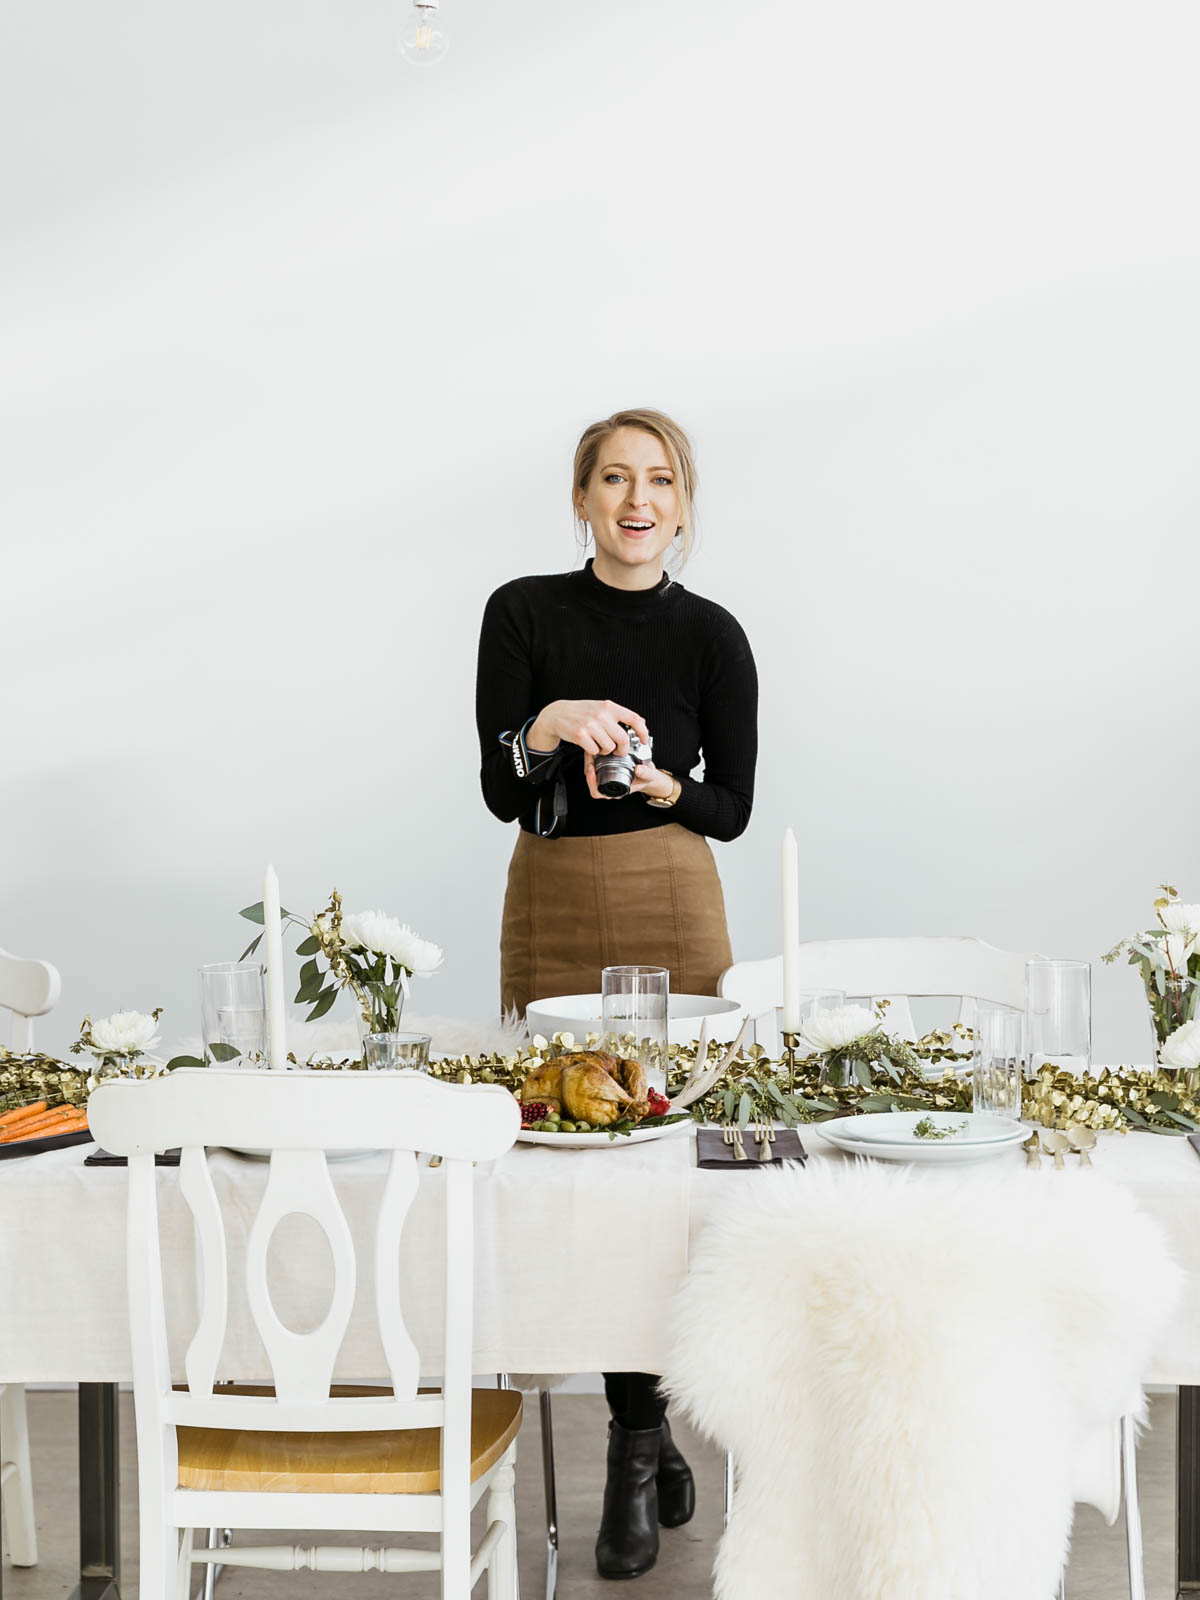 If you didn't Insta it, did it even happen? Here are my top tips for throwing an Instagram Worthy Dinner Party that will have your guests snapping errything